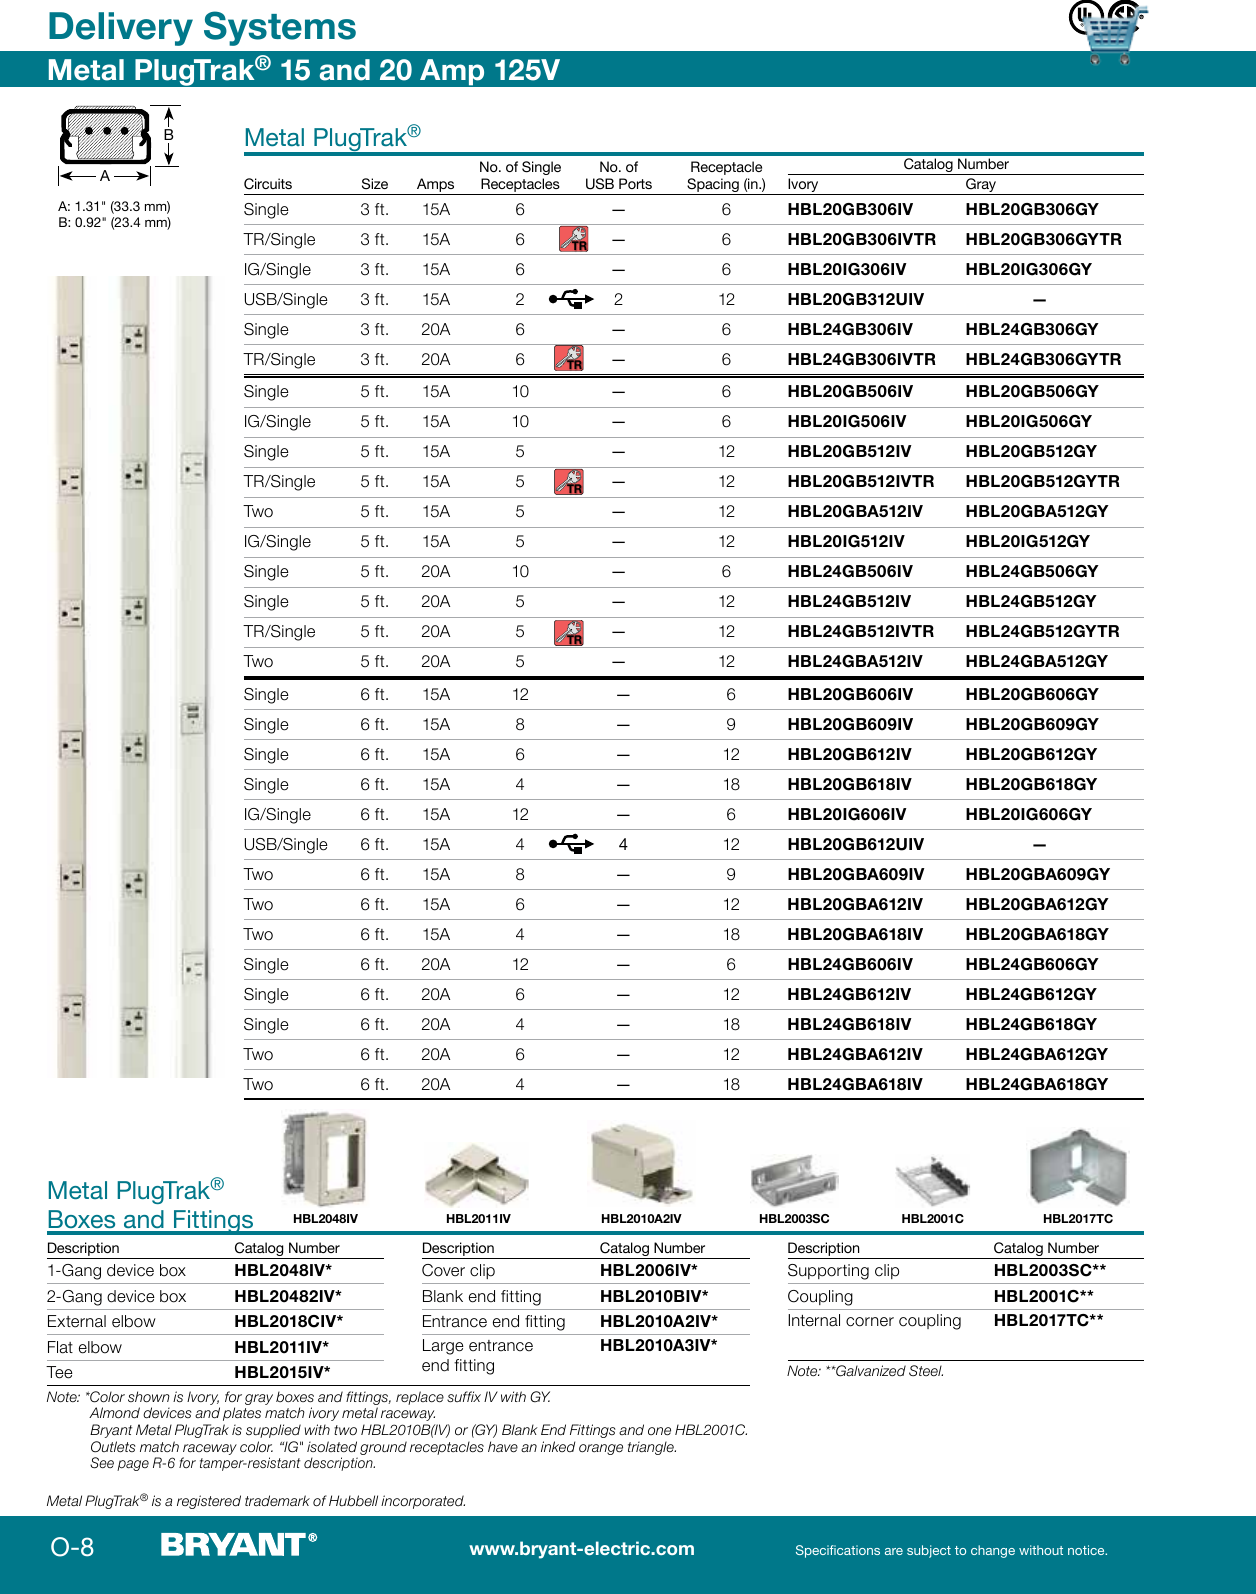 Page 8 of 12 - 1000293193-Catalog